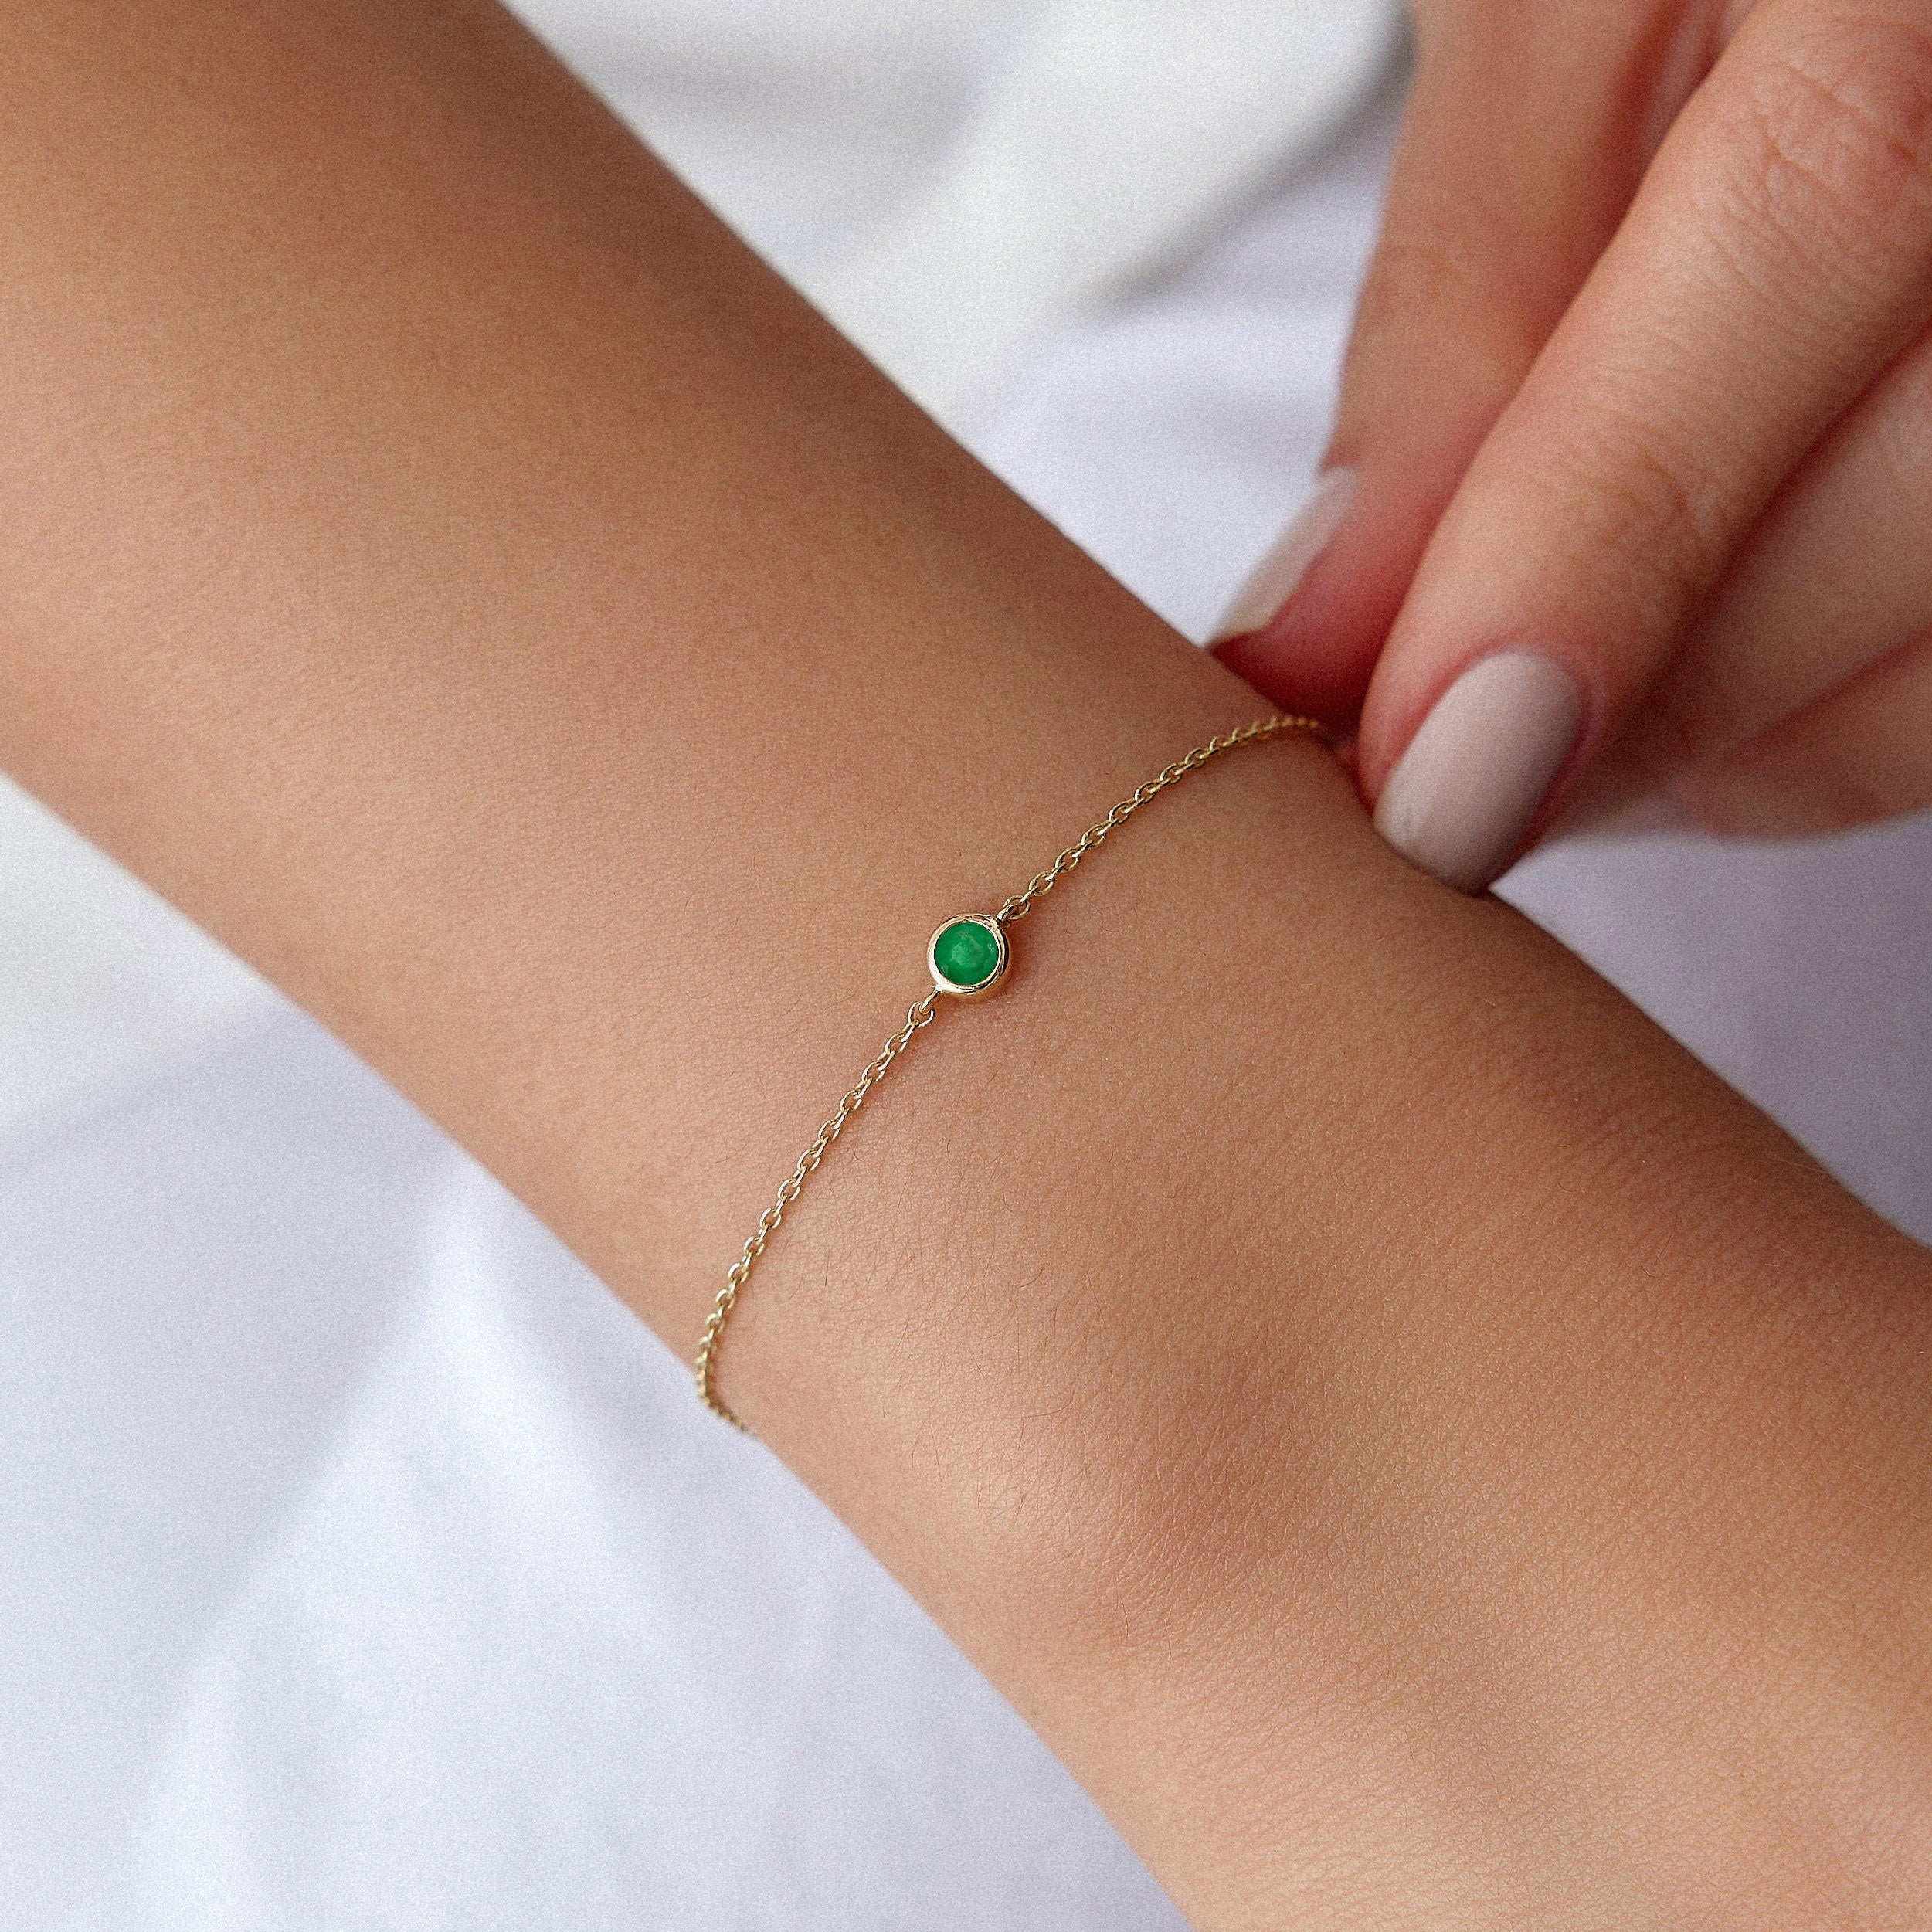 Natural Solitaire Emerald Bracelet Available in 14K and 18K Gold